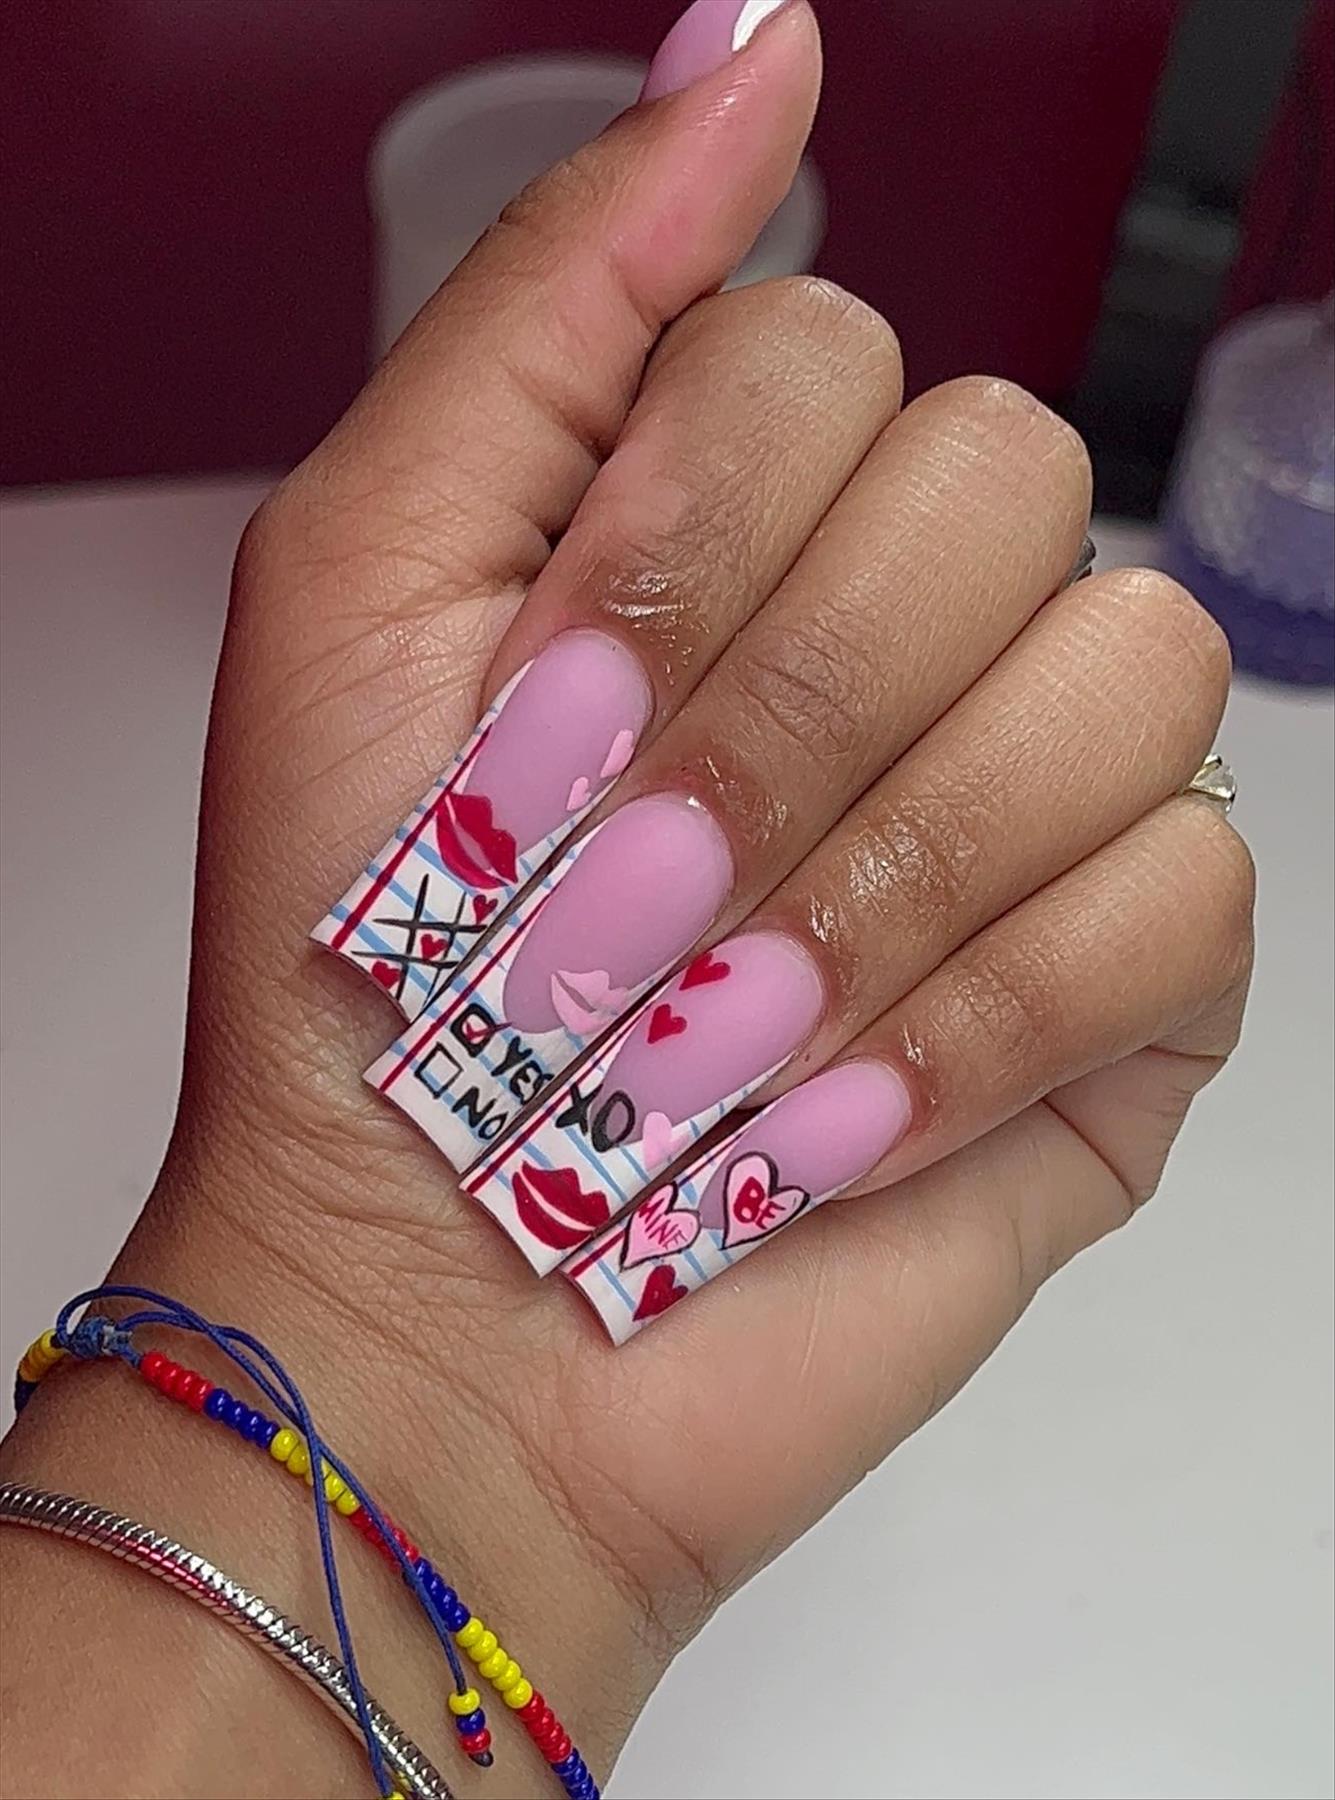 Romantic Valentine's Day nail designs for long coffin nails